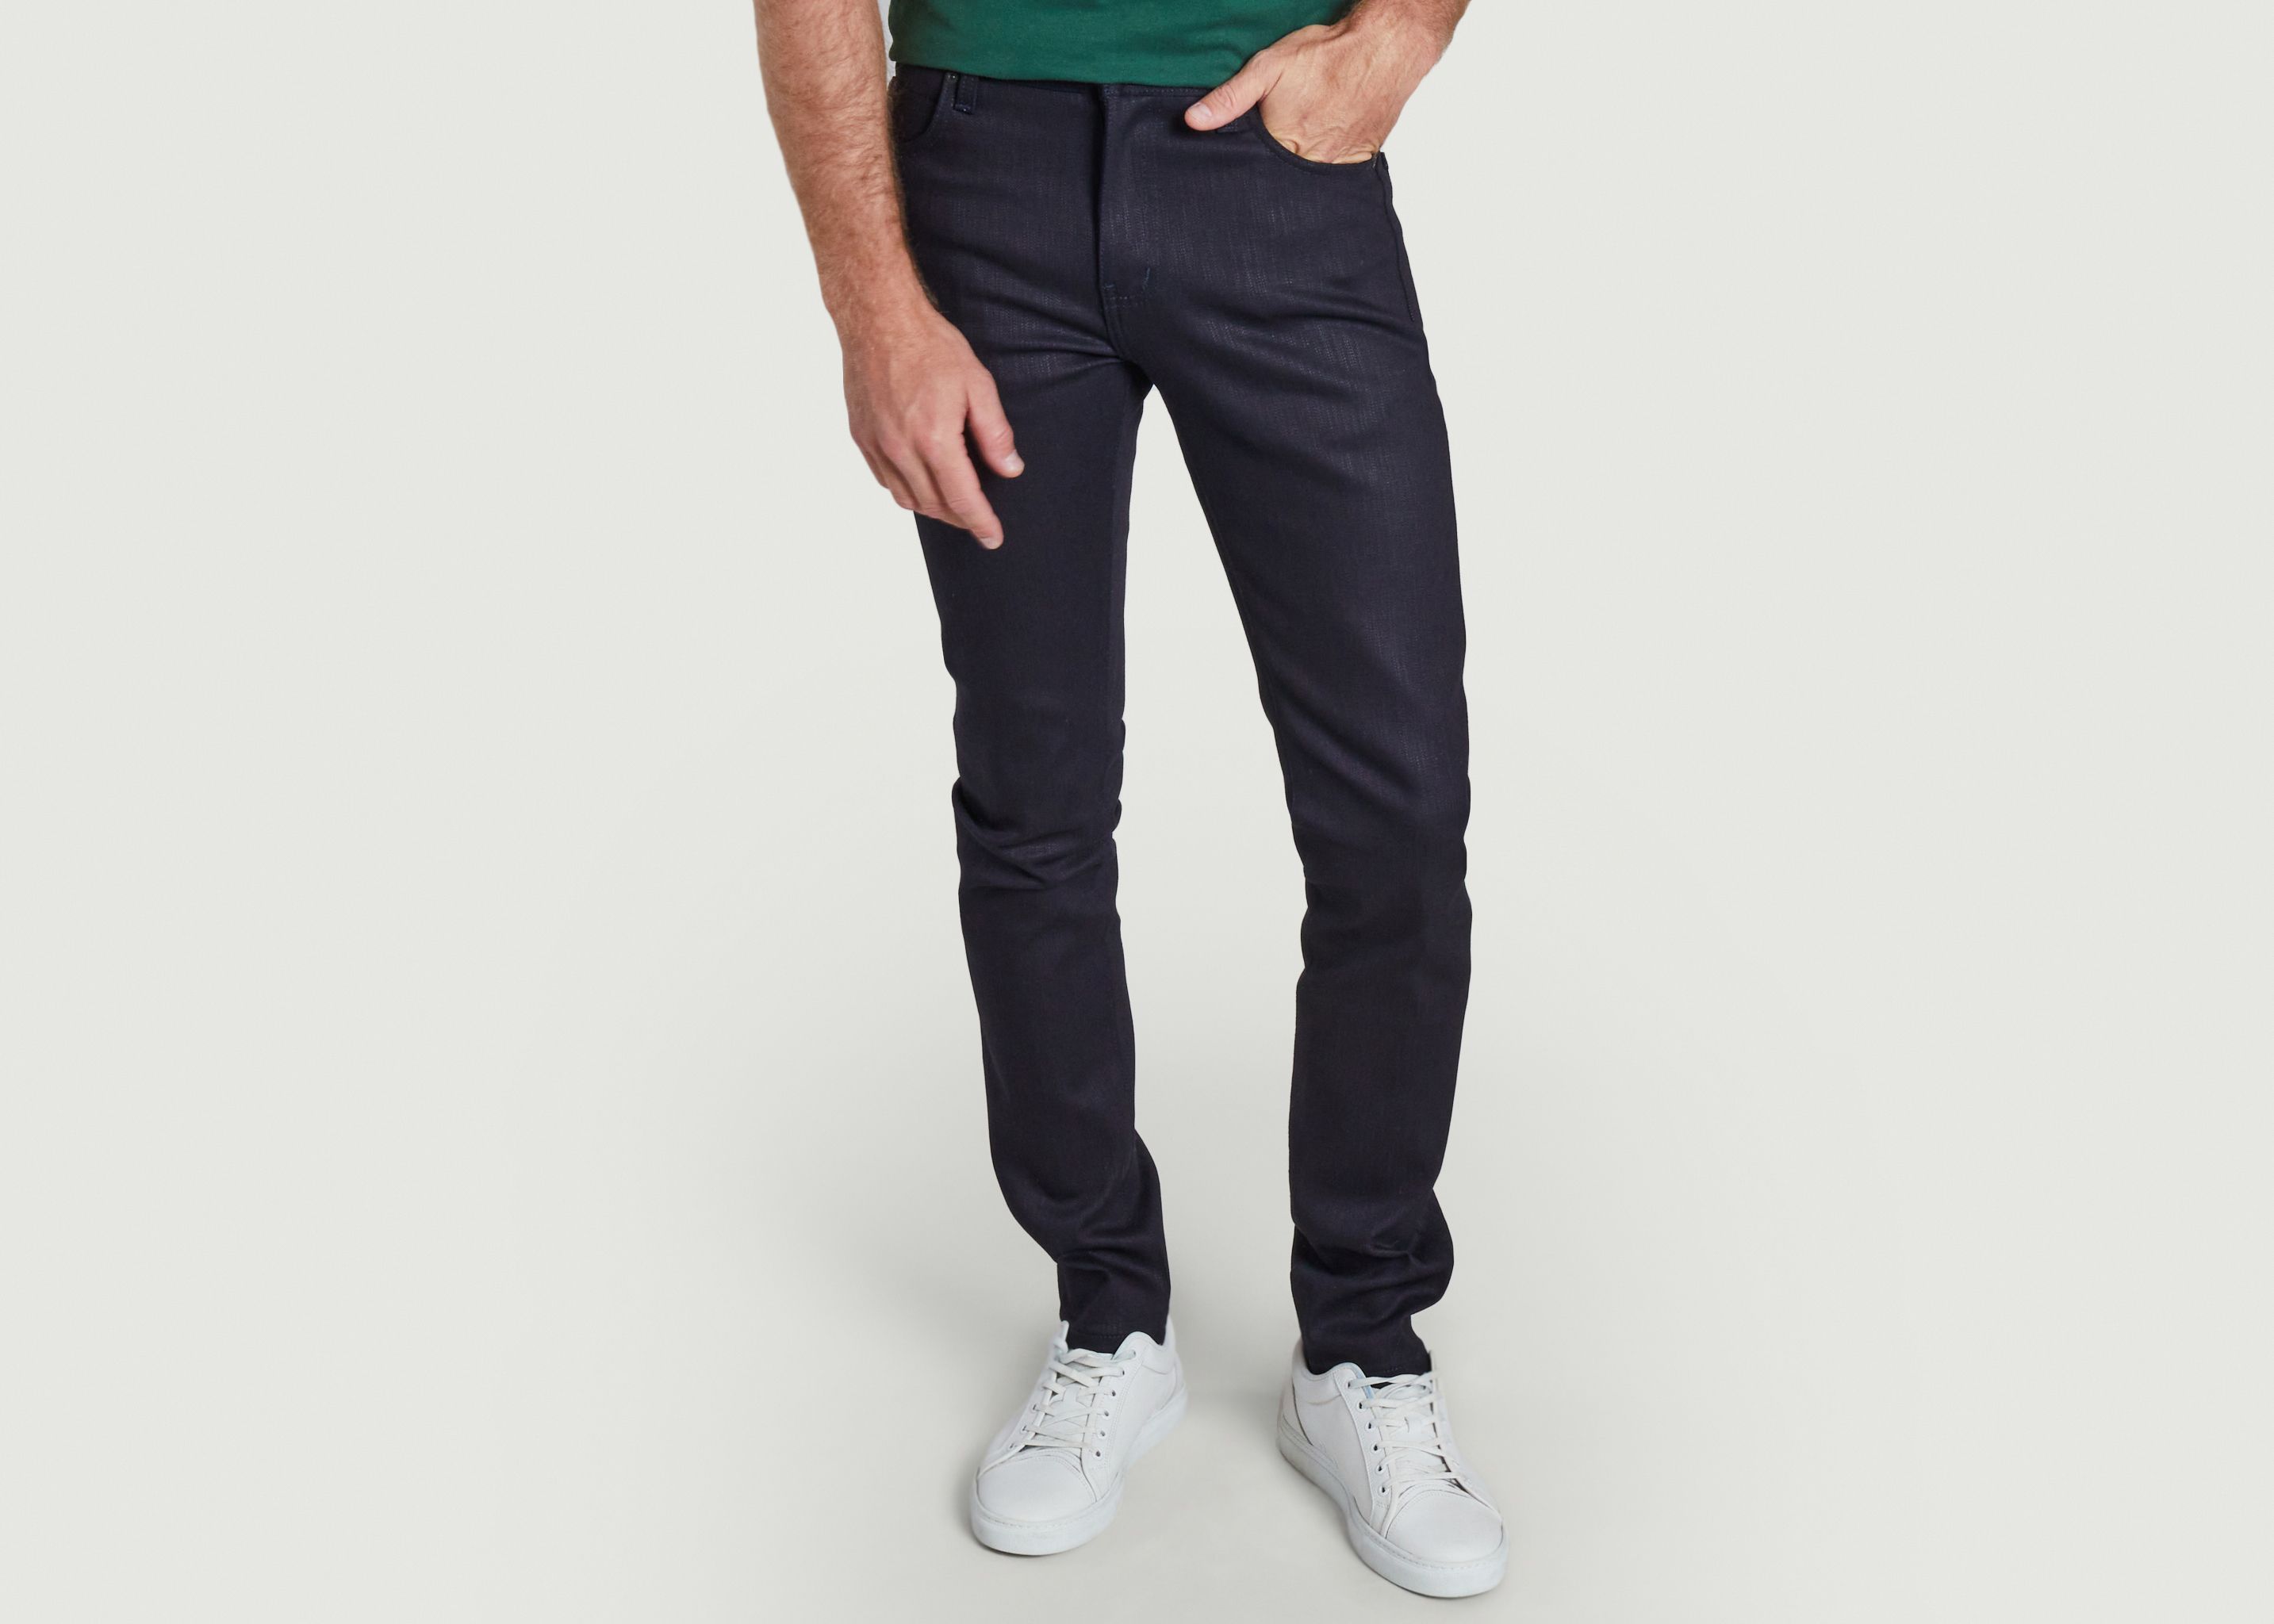 Super Guy Midnight Slub Stretch Selvedge Jeans - Naked and Famous